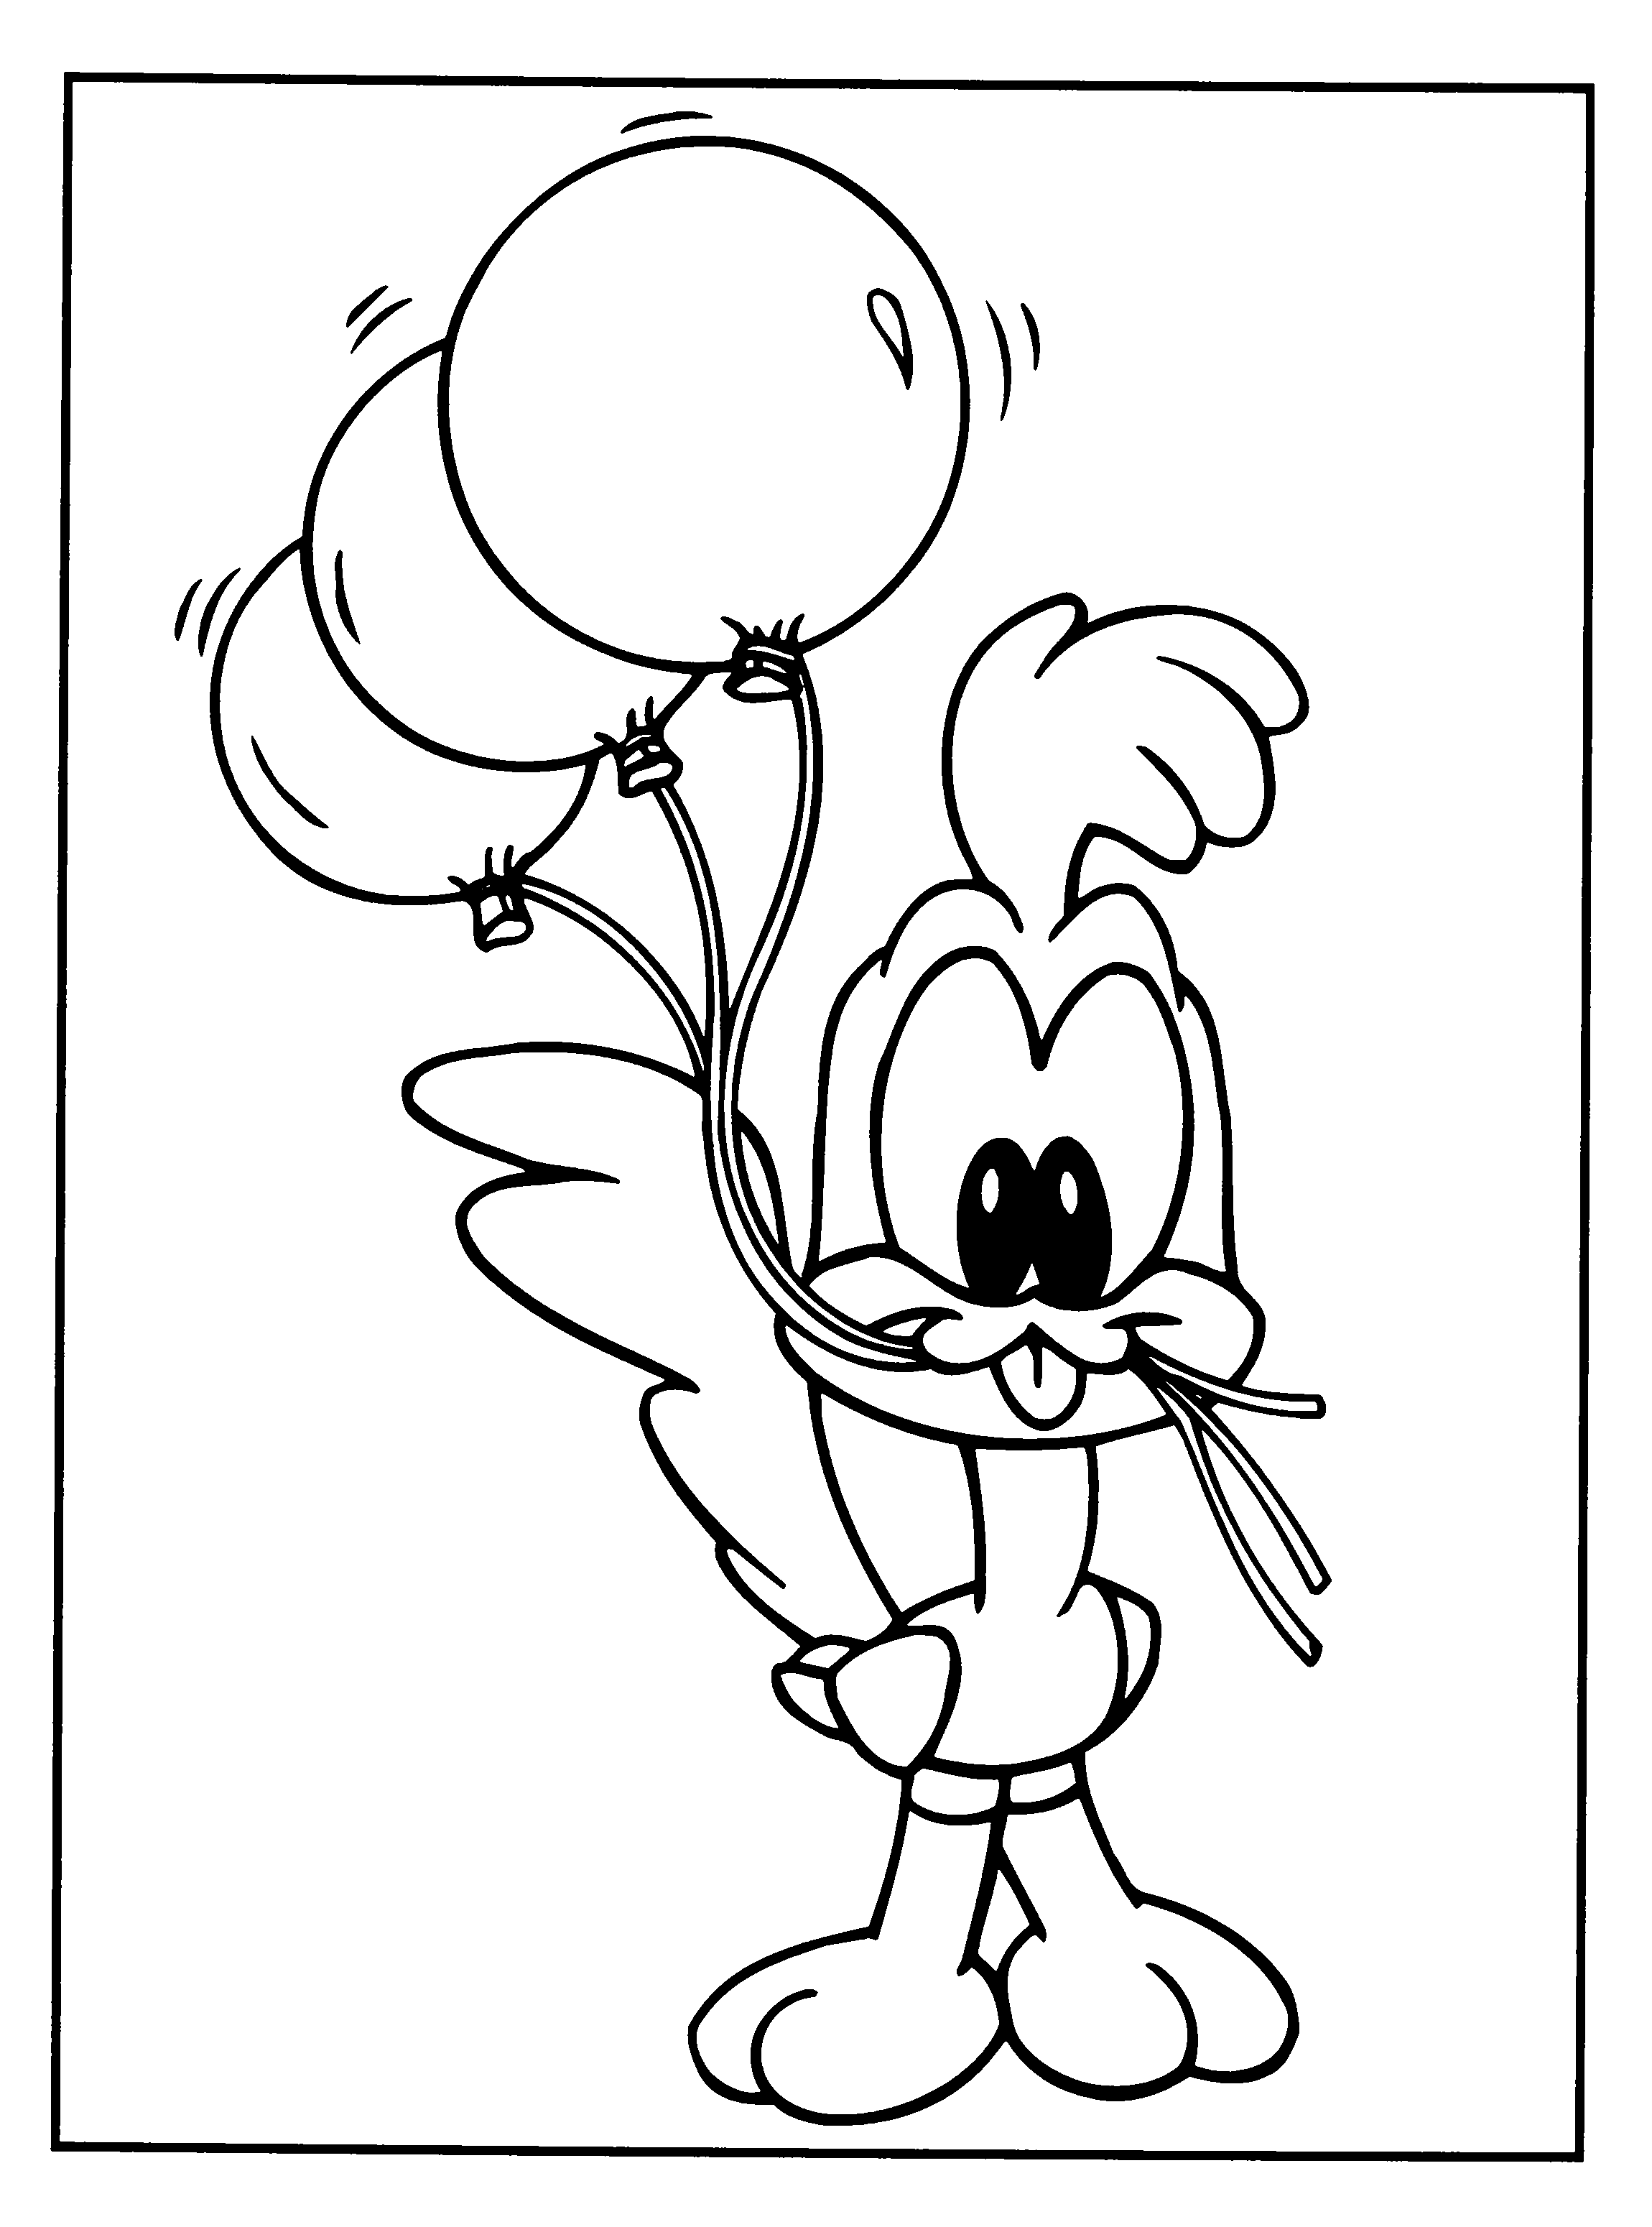 Coloring Page - Baby looney tunes coloring pages 8